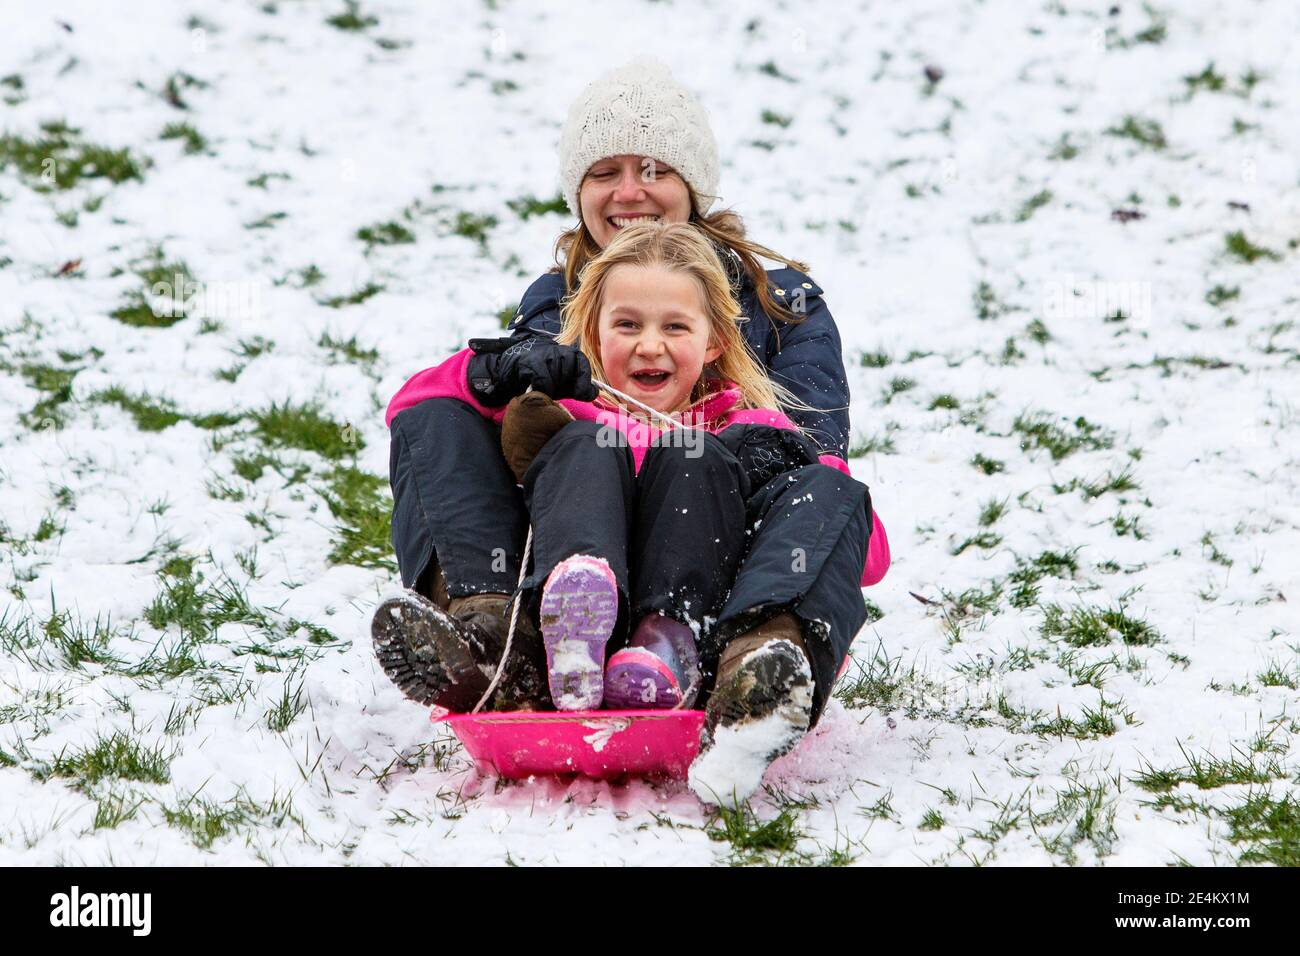 Chippenham, Wiltshire, UK. 24th January, 2021. As Chippenham residents wake up to their first snow of the year, a woman and a child are pictured in a local park in Chippenham as they slide down a hill on a sledge. Credit: Lynchpics/Alamy Live News Stock Photo